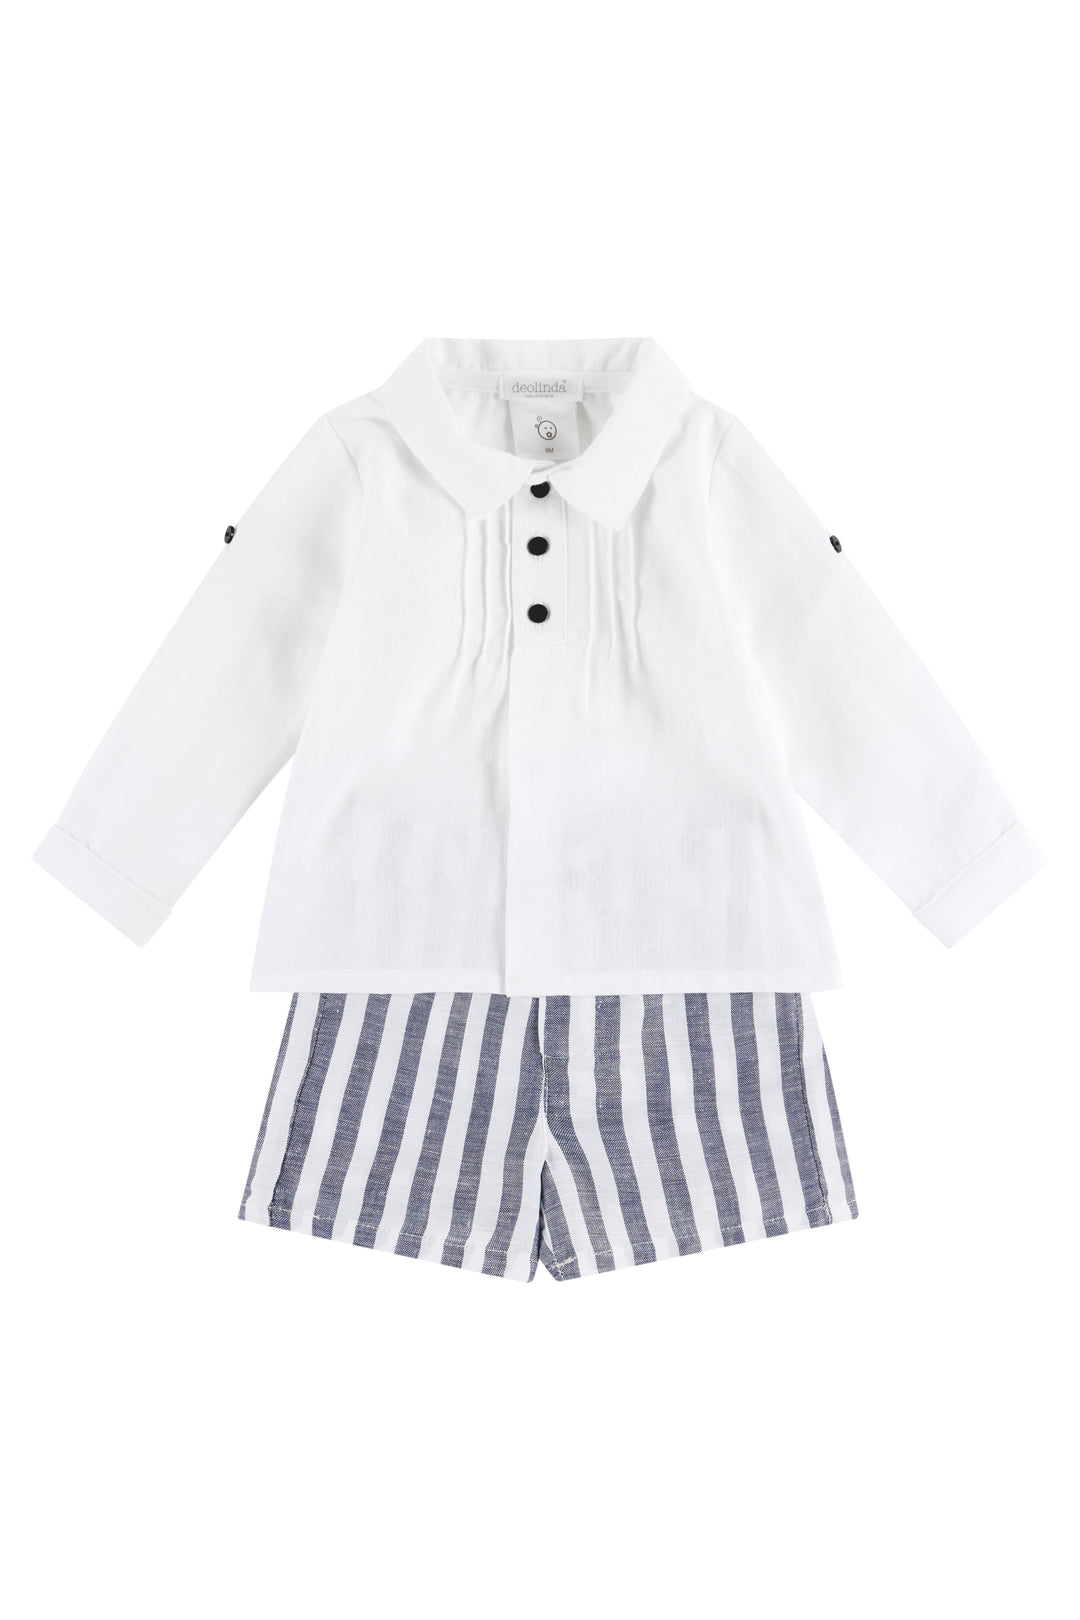 Deolinda "Cooper" Shirt & Navy Striped Shorts | iphoneandroidapplications